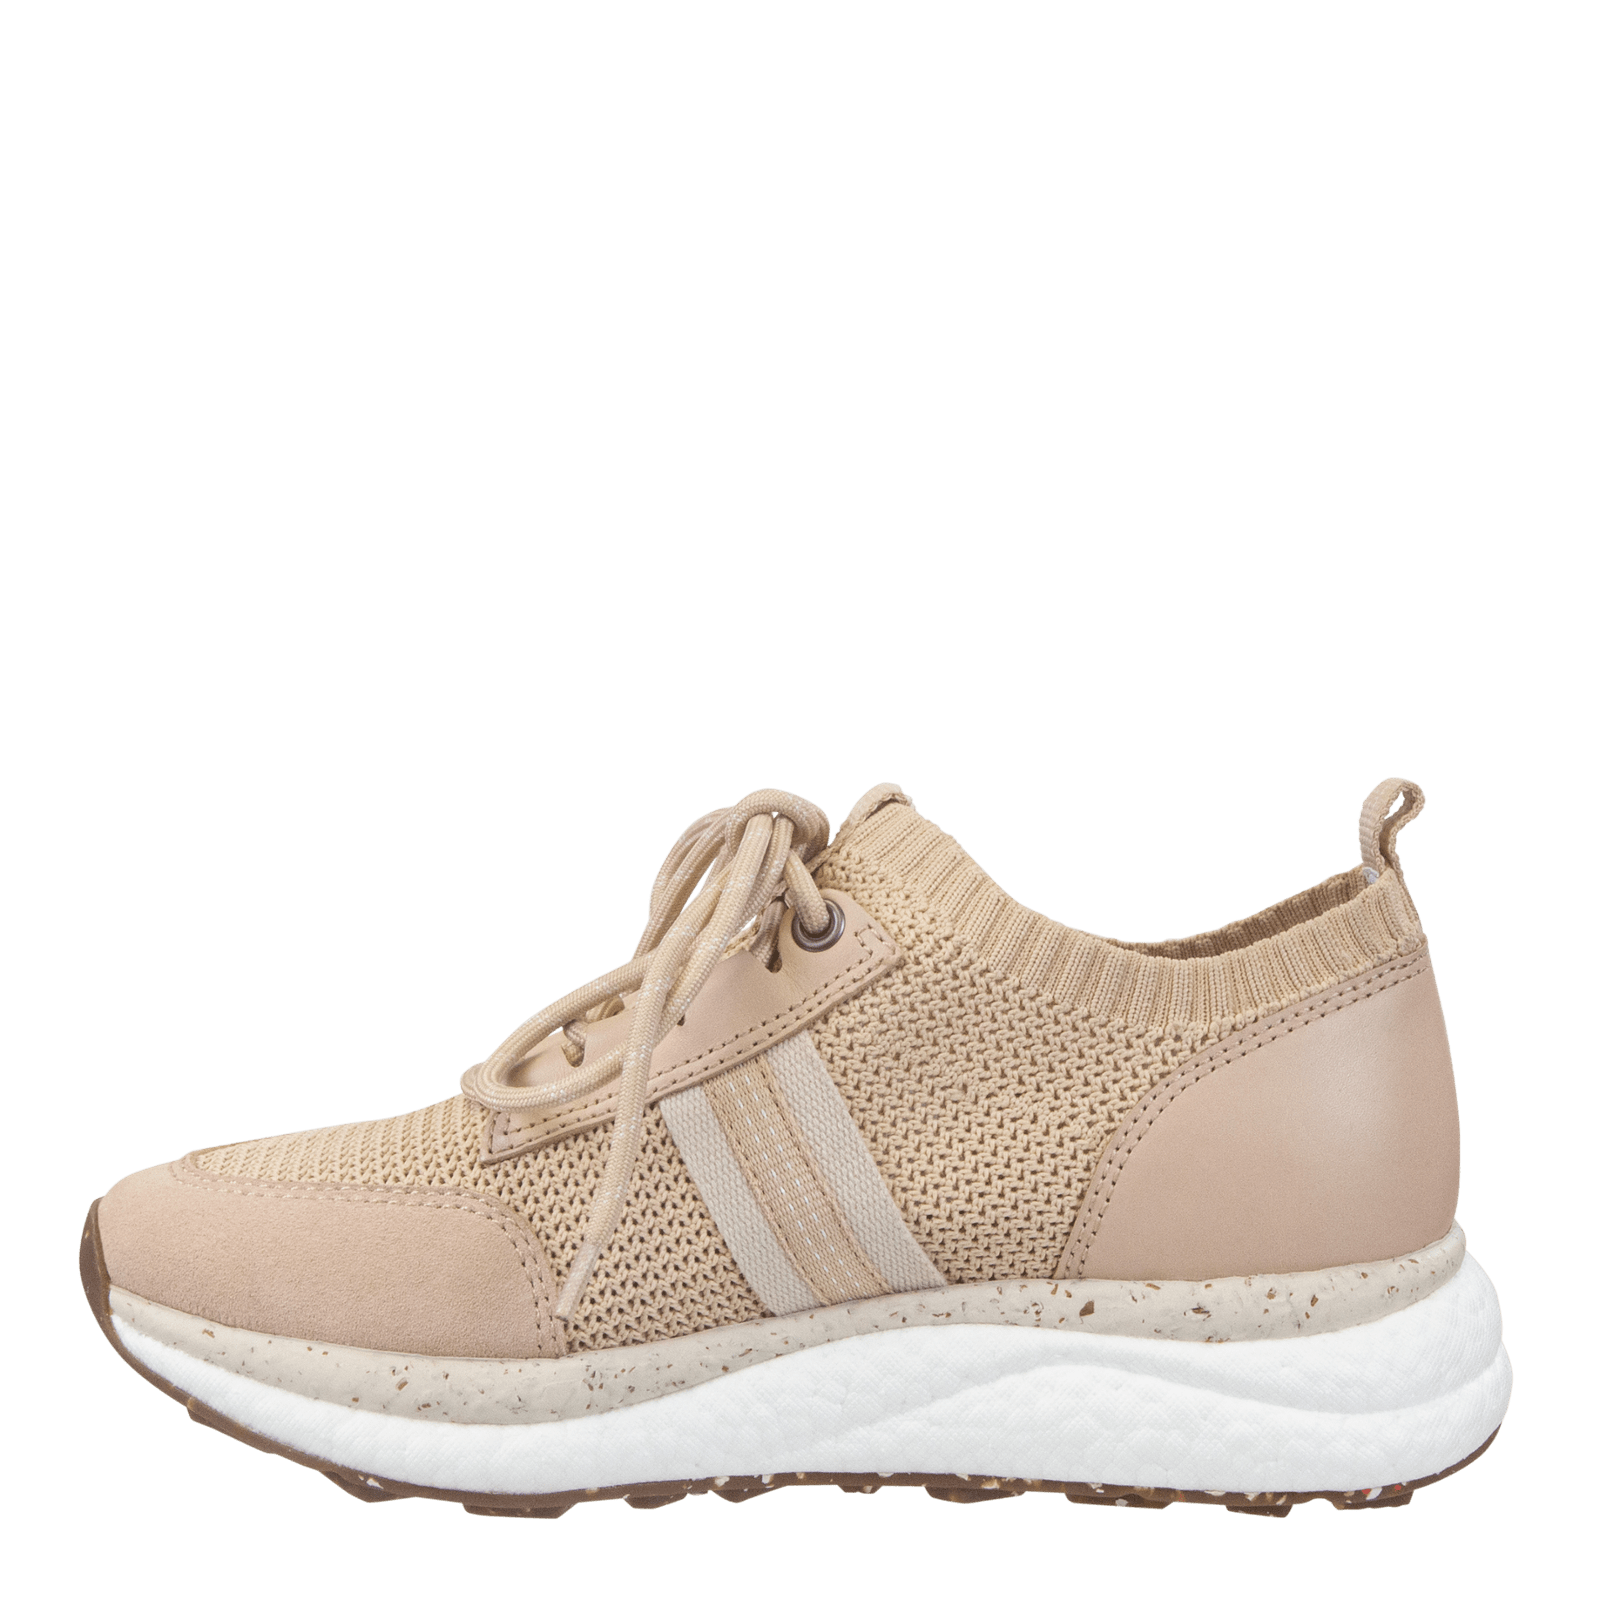 Speed in Mist Sneakers | Women's Shoes by OTBT - OTBT shoes